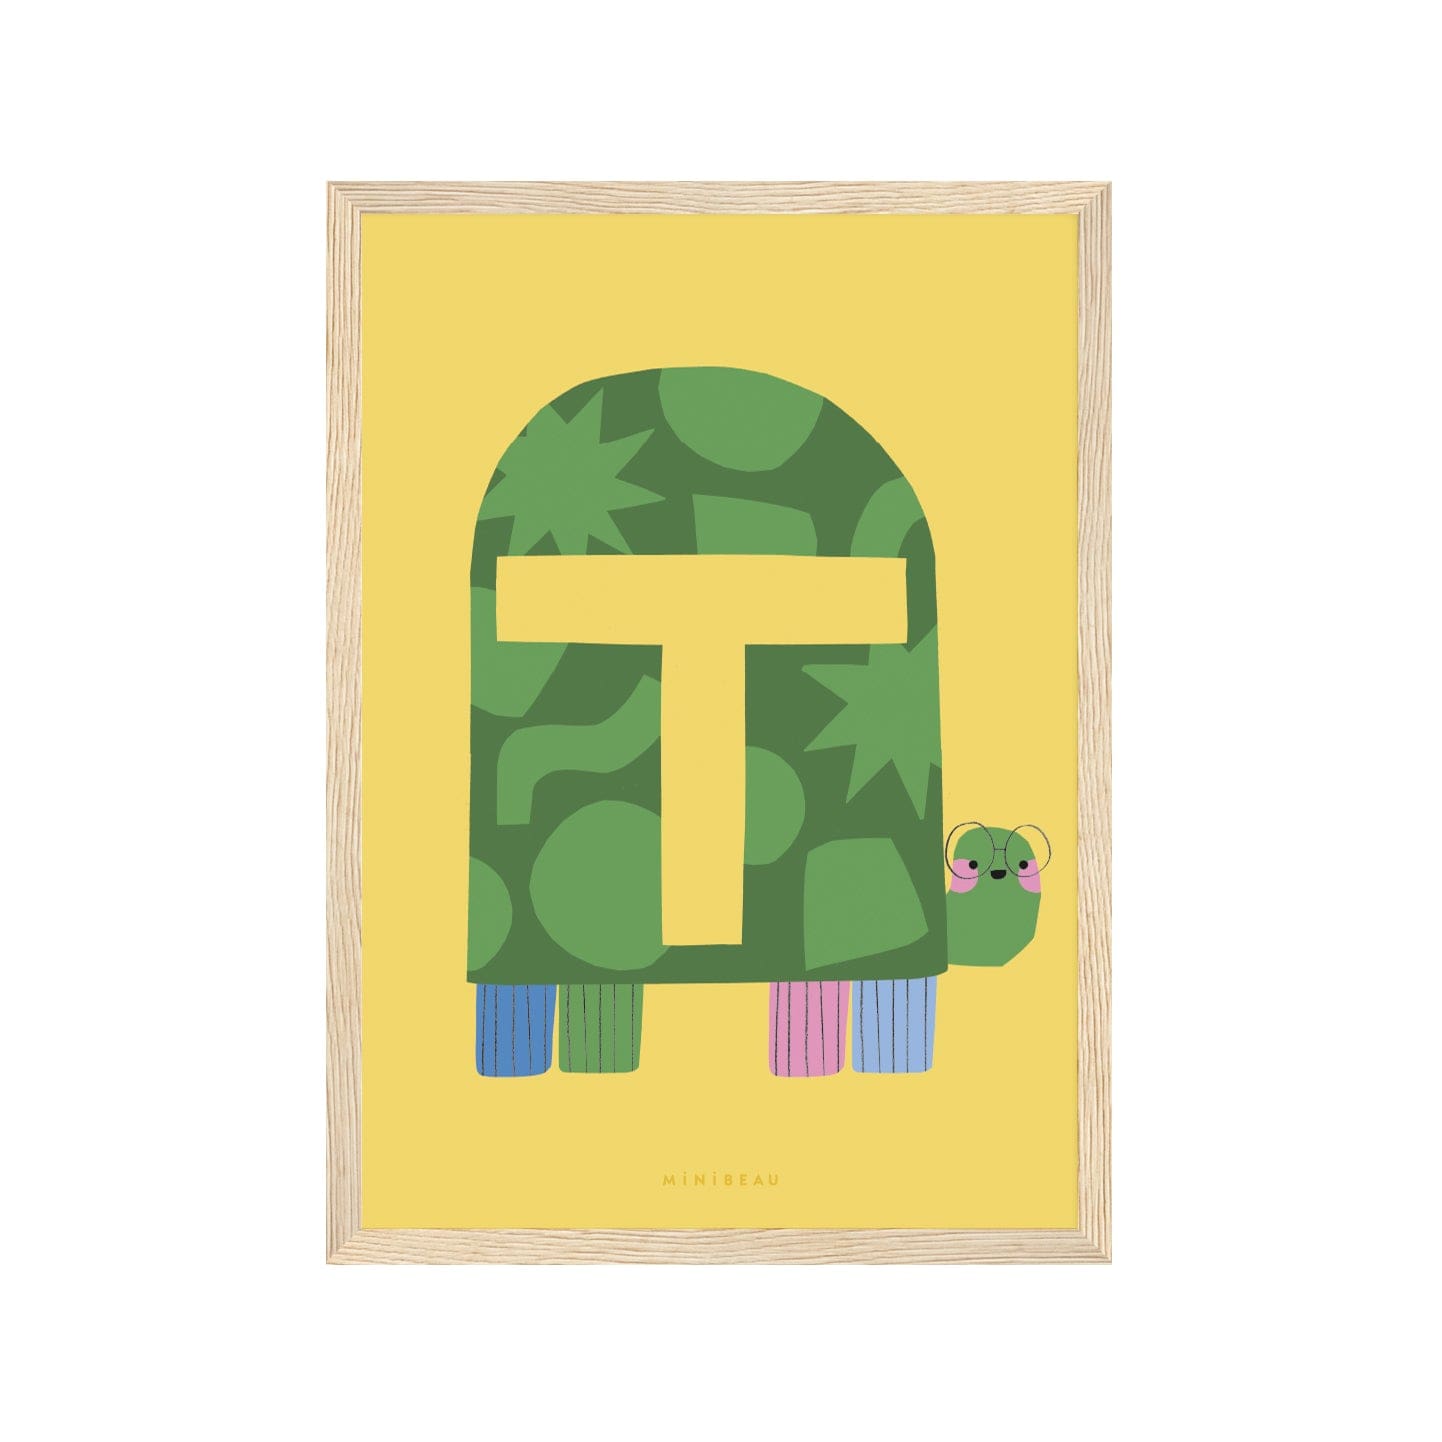 Art print in a light wood frame. Our Happy Alphabet 'T' Art Print shows a tortoise looking back smiling, wearing wire framed glasses, with a large yellow T on it's shell. Each leg is a different colour, blue, green, pink and lilac, all on a yellow background.